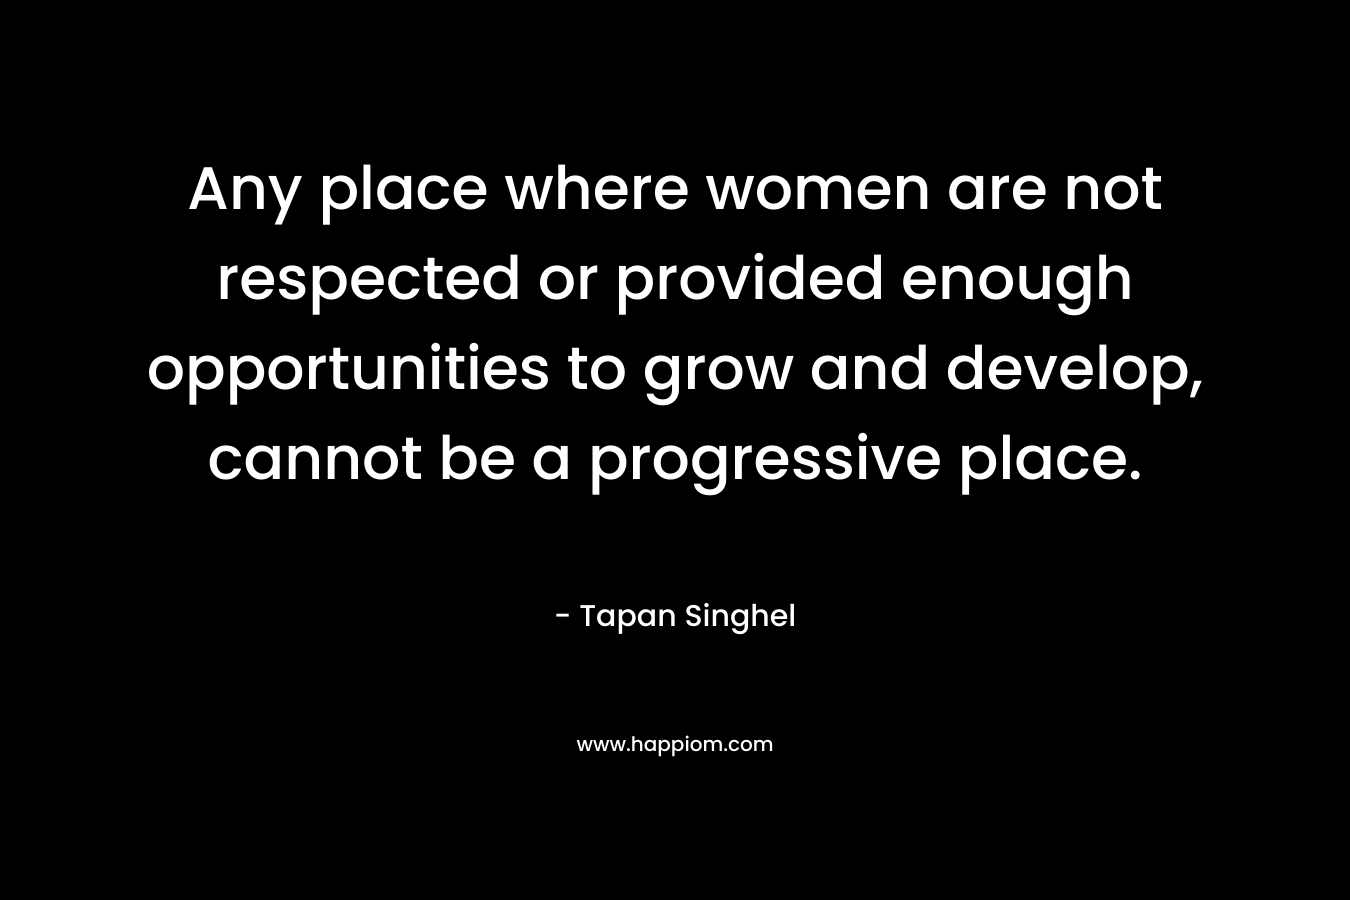 Any place where women are not respected or provided enough opportunities to grow and develop, cannot be a progressive place. – Tapan Singhel